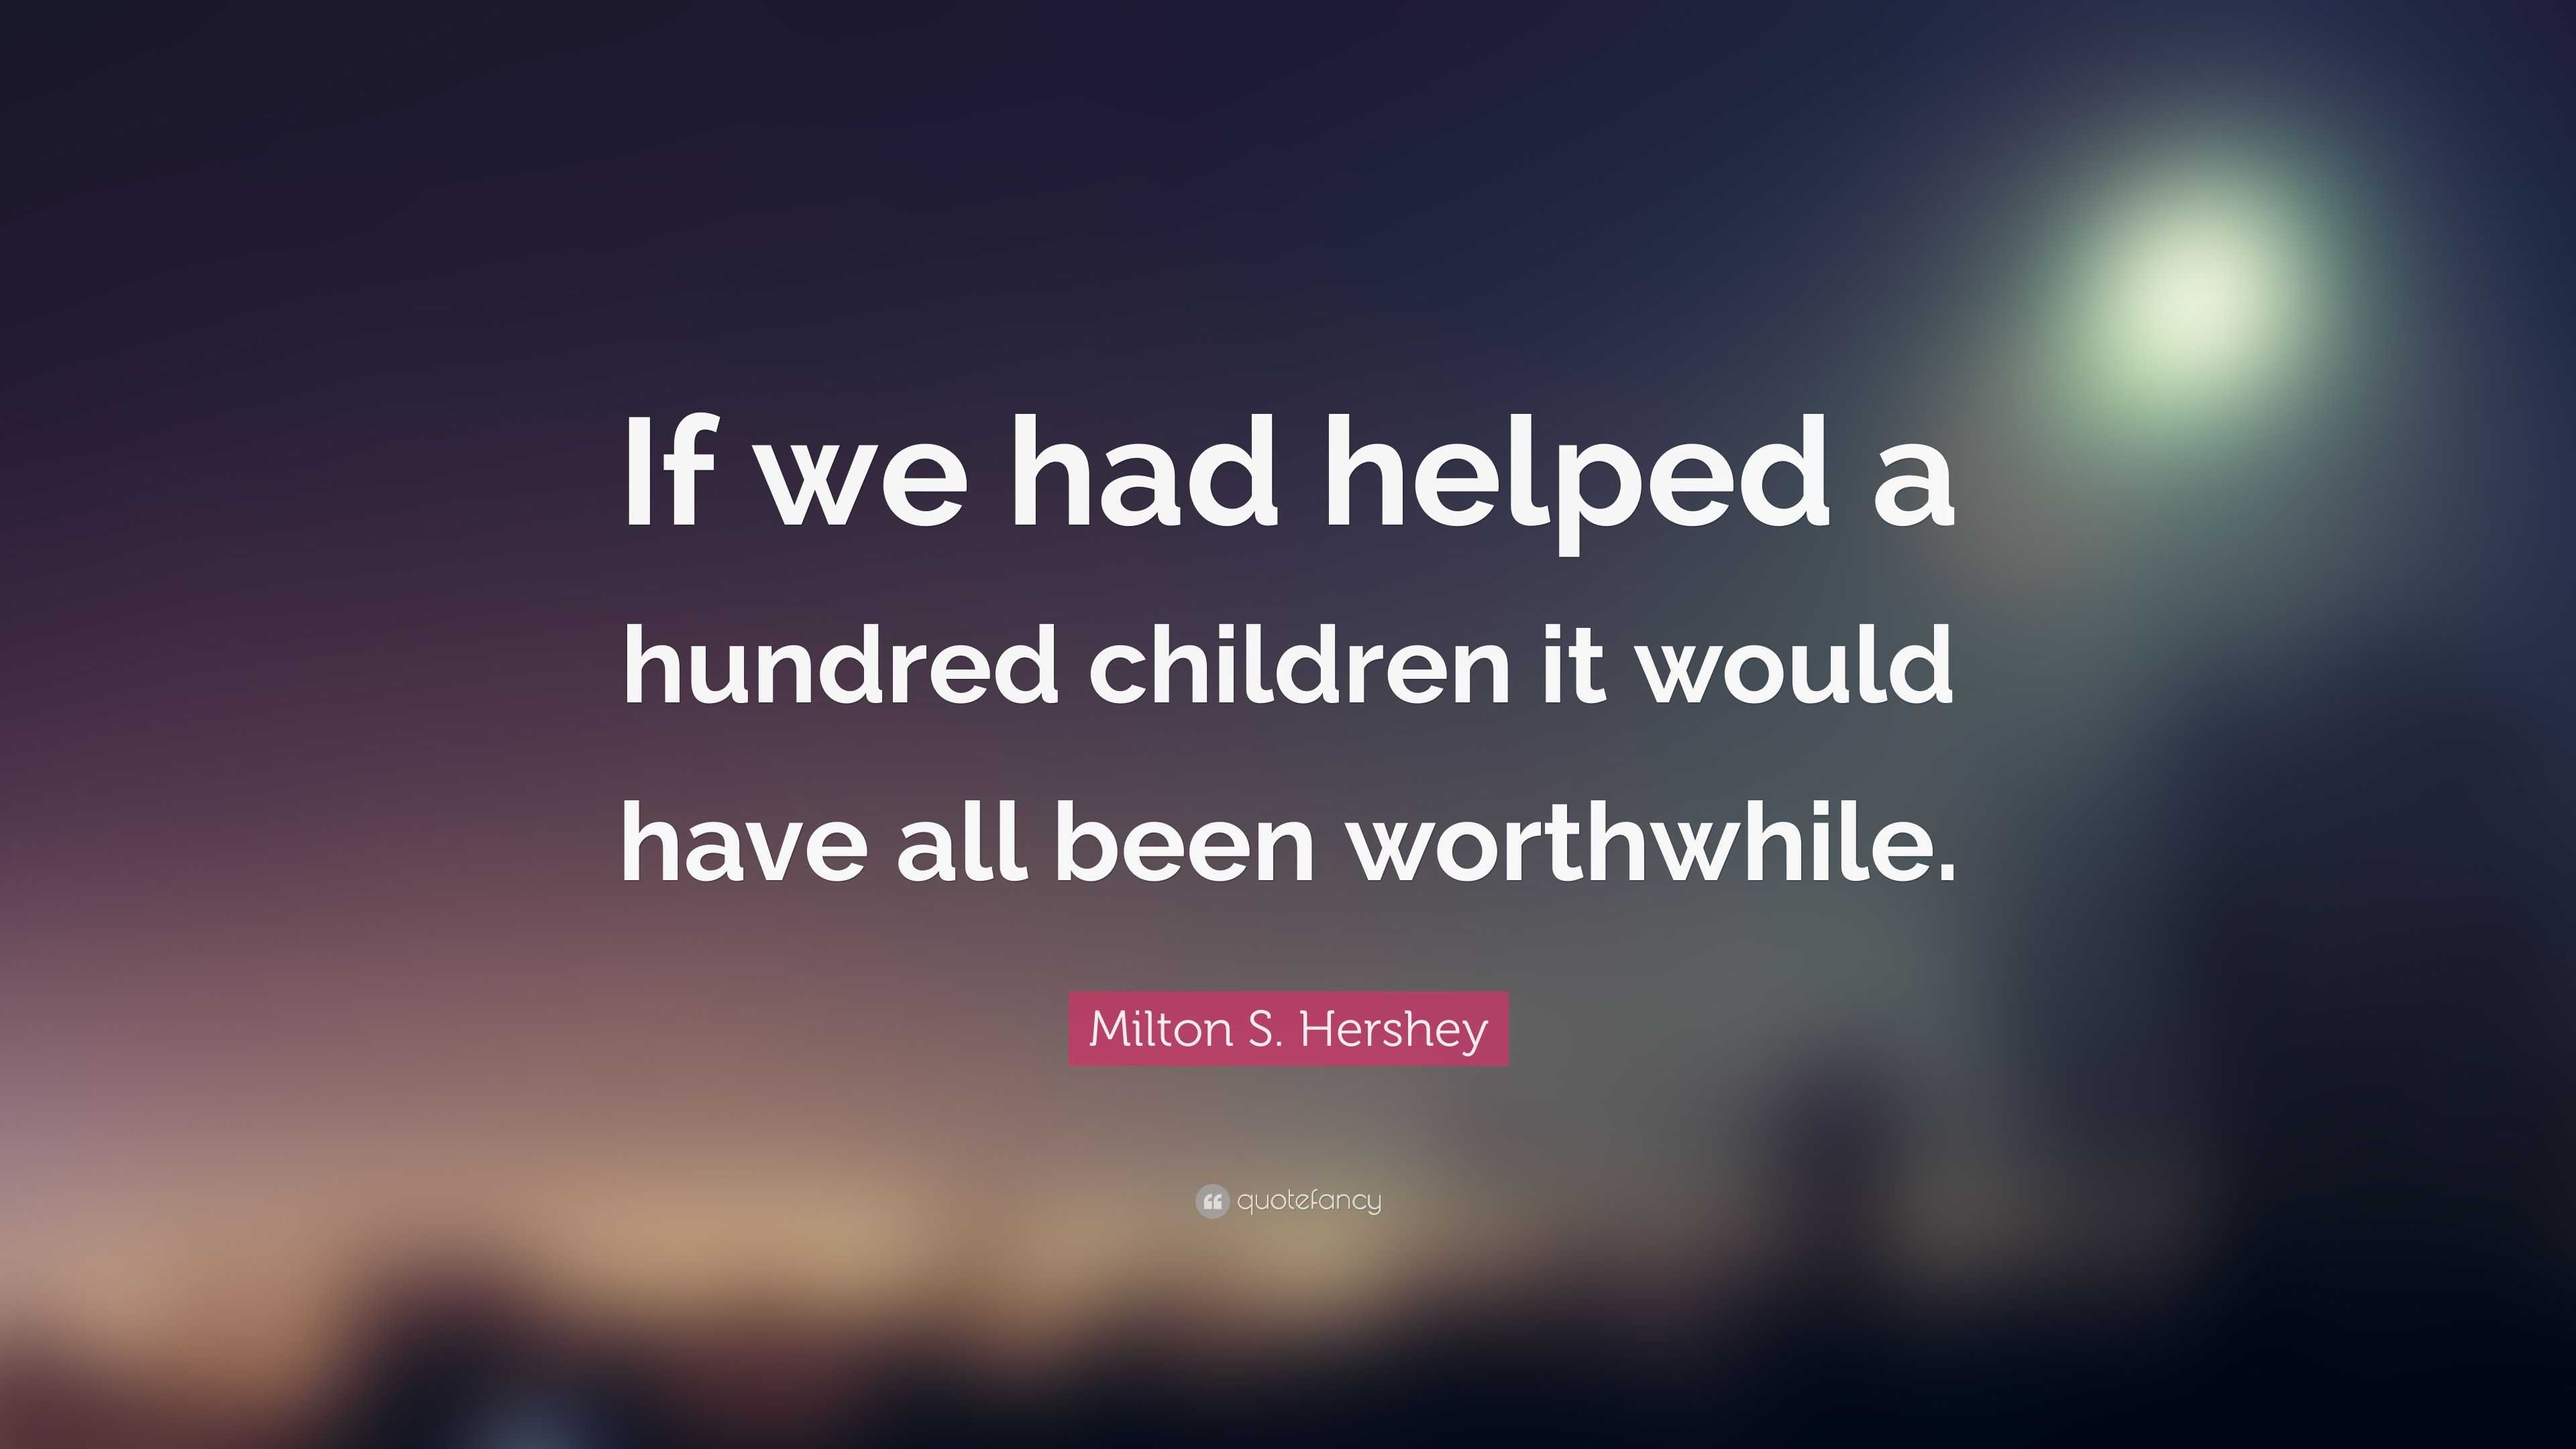 Milton S. Hershey Quote: “If we had helped a hundred children it would